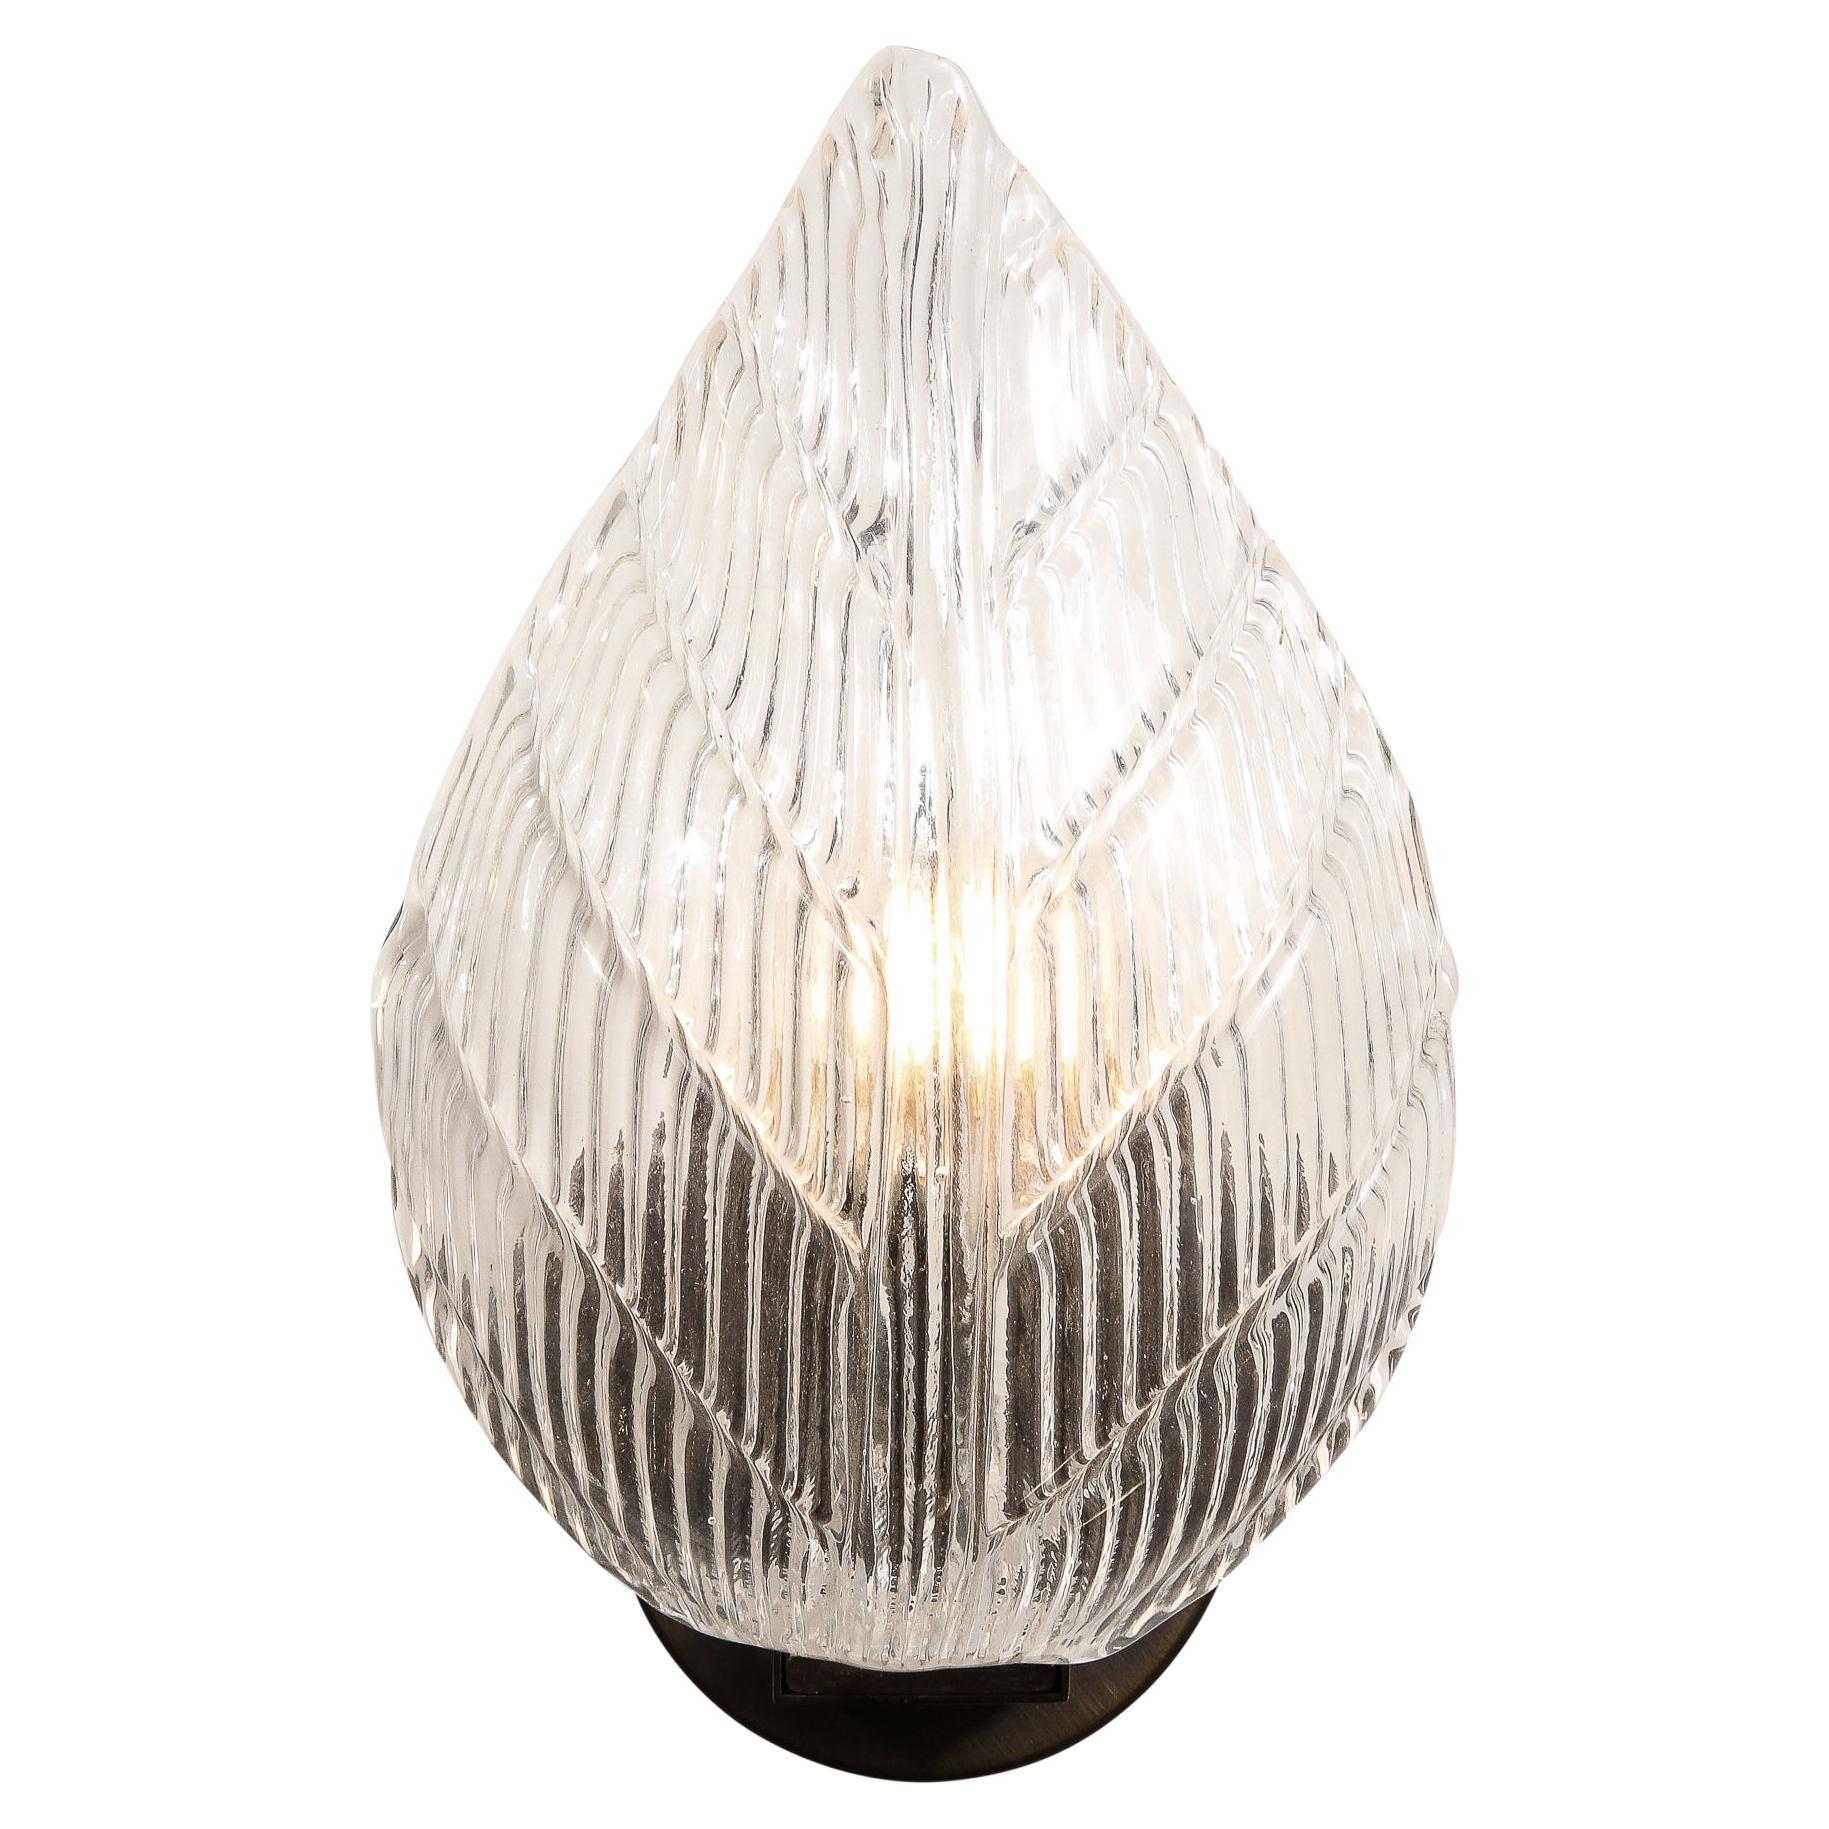 Modernist Handblown Murano Leaf Form Sconce in Transparent Reeded Glass